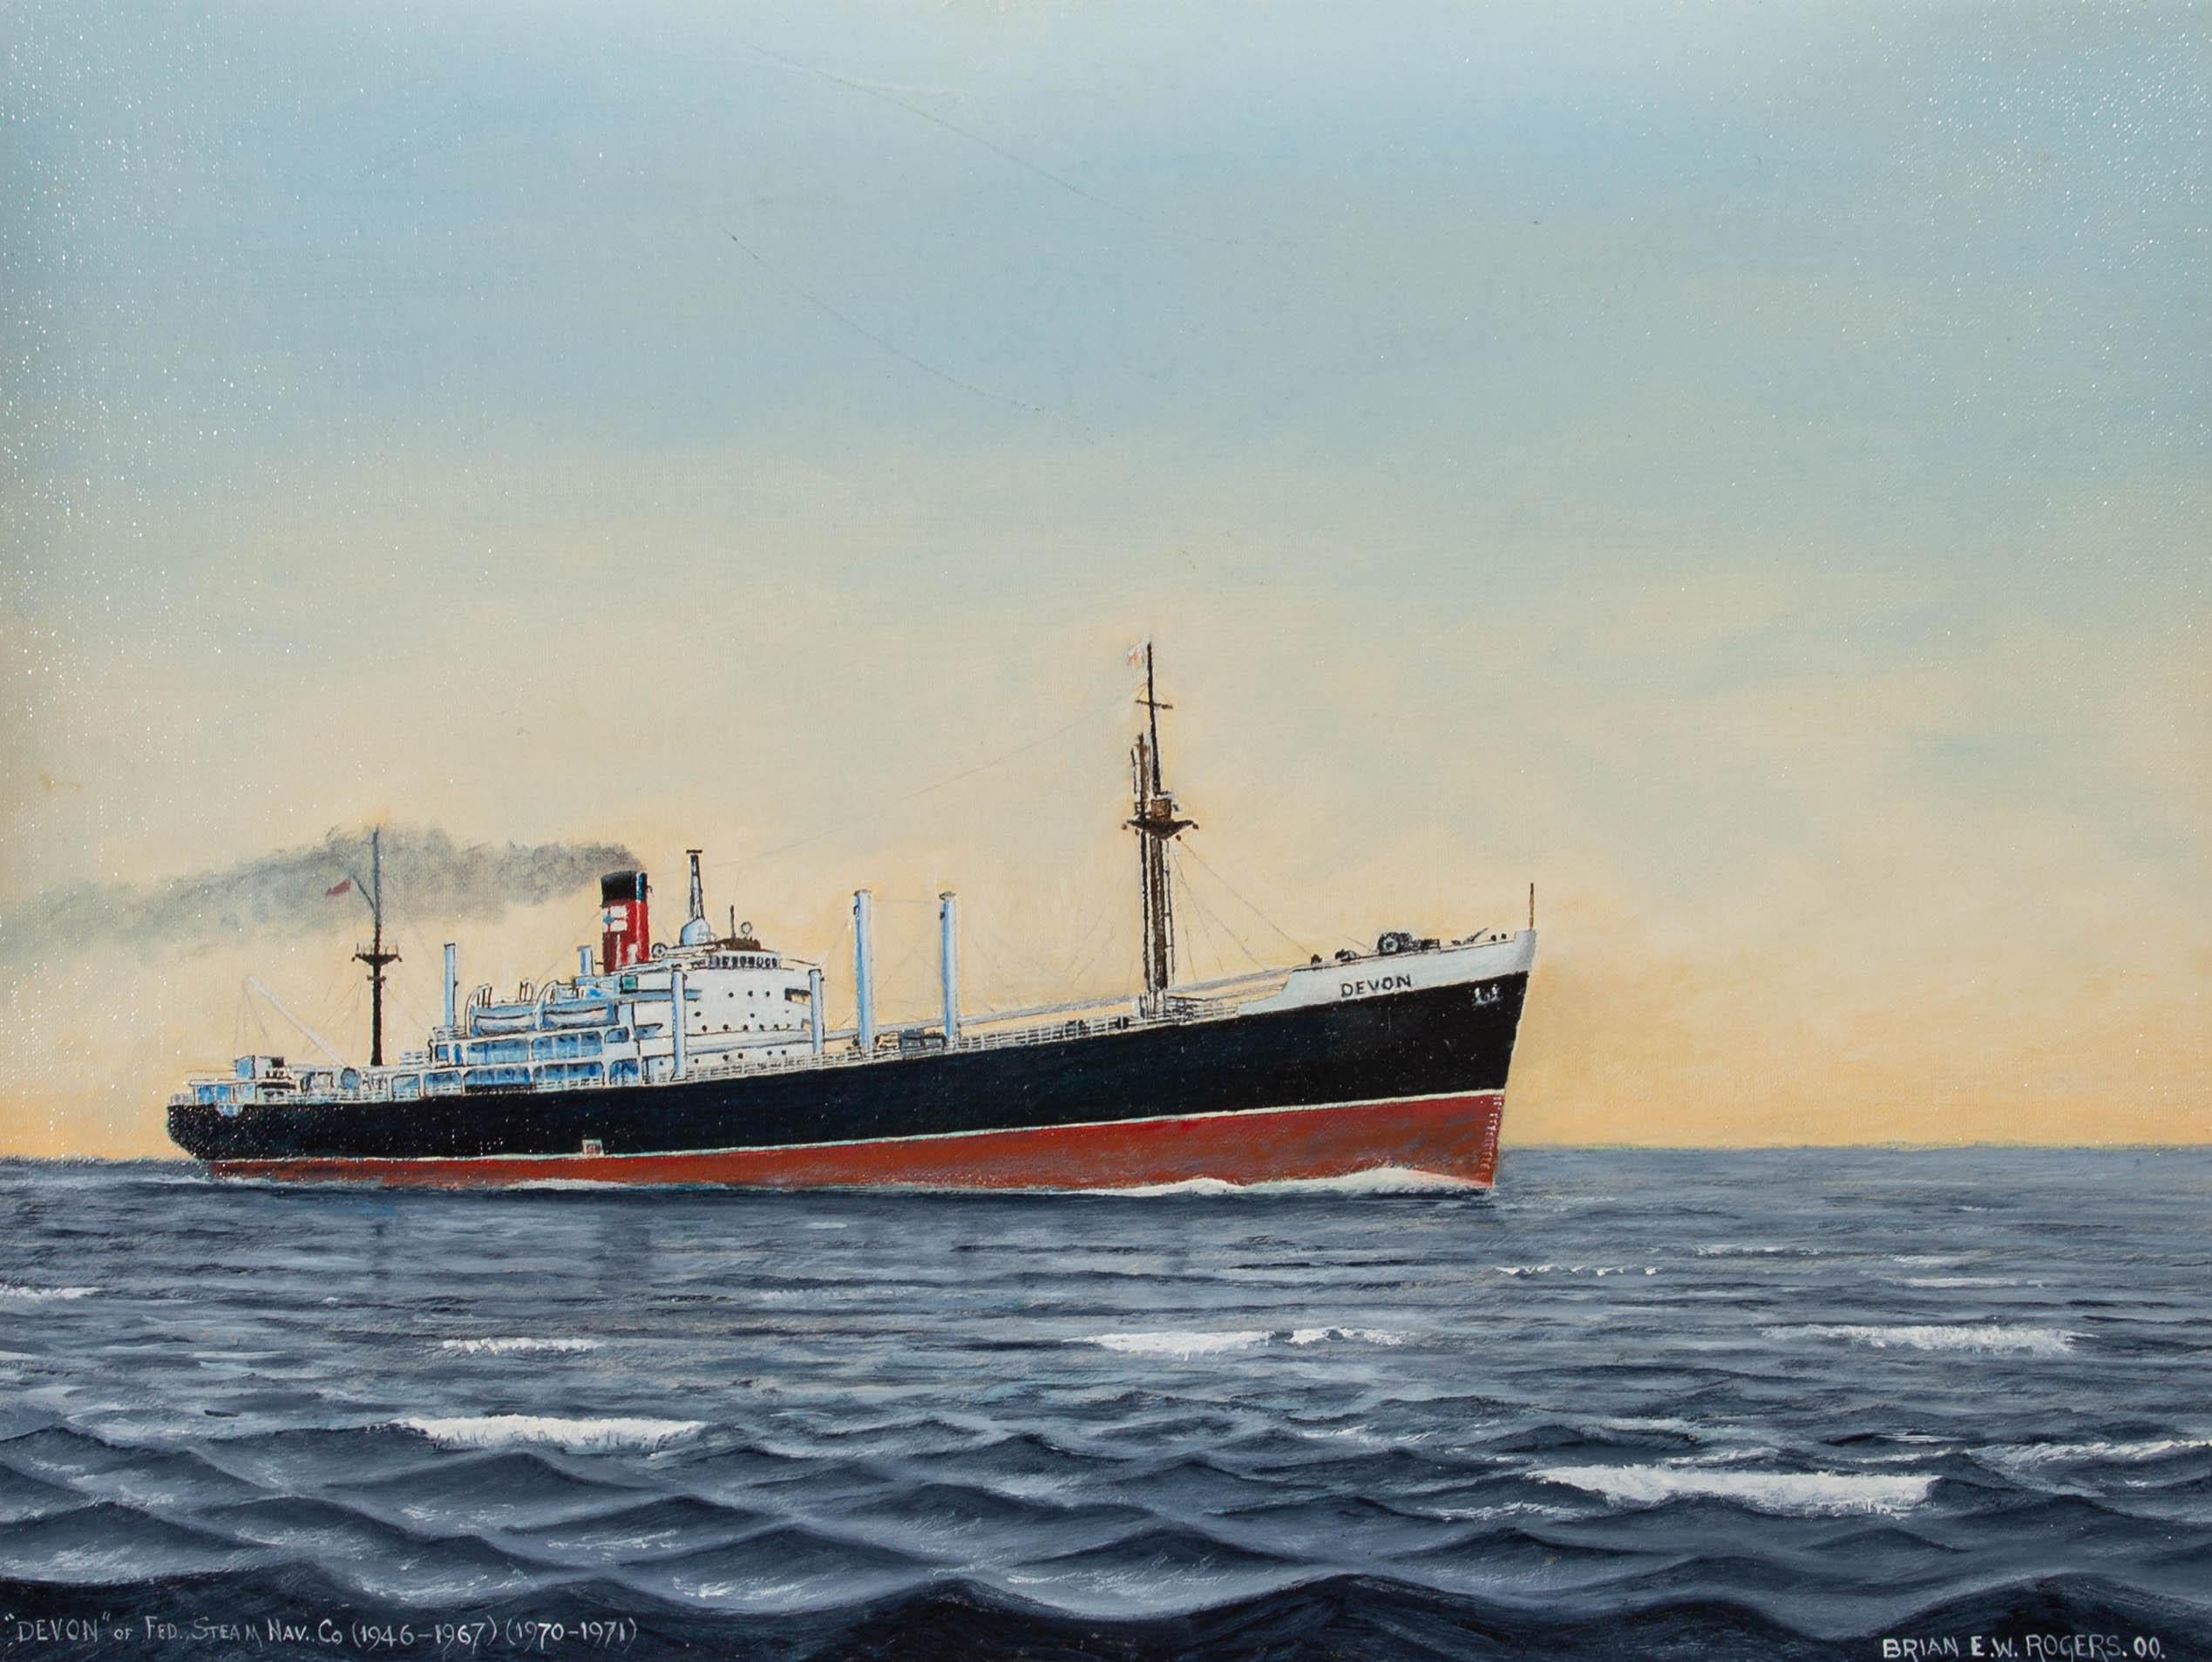 A vibrant oil painting by Brian E.W. Rogers, depicting the Federal Steam Navigation Co/s DEVON (1946-1967) (1970-1971) at sea. Signed and dated to the lower right-hand corner. Ship description inscribed to the opposite lower corner. Presented in a